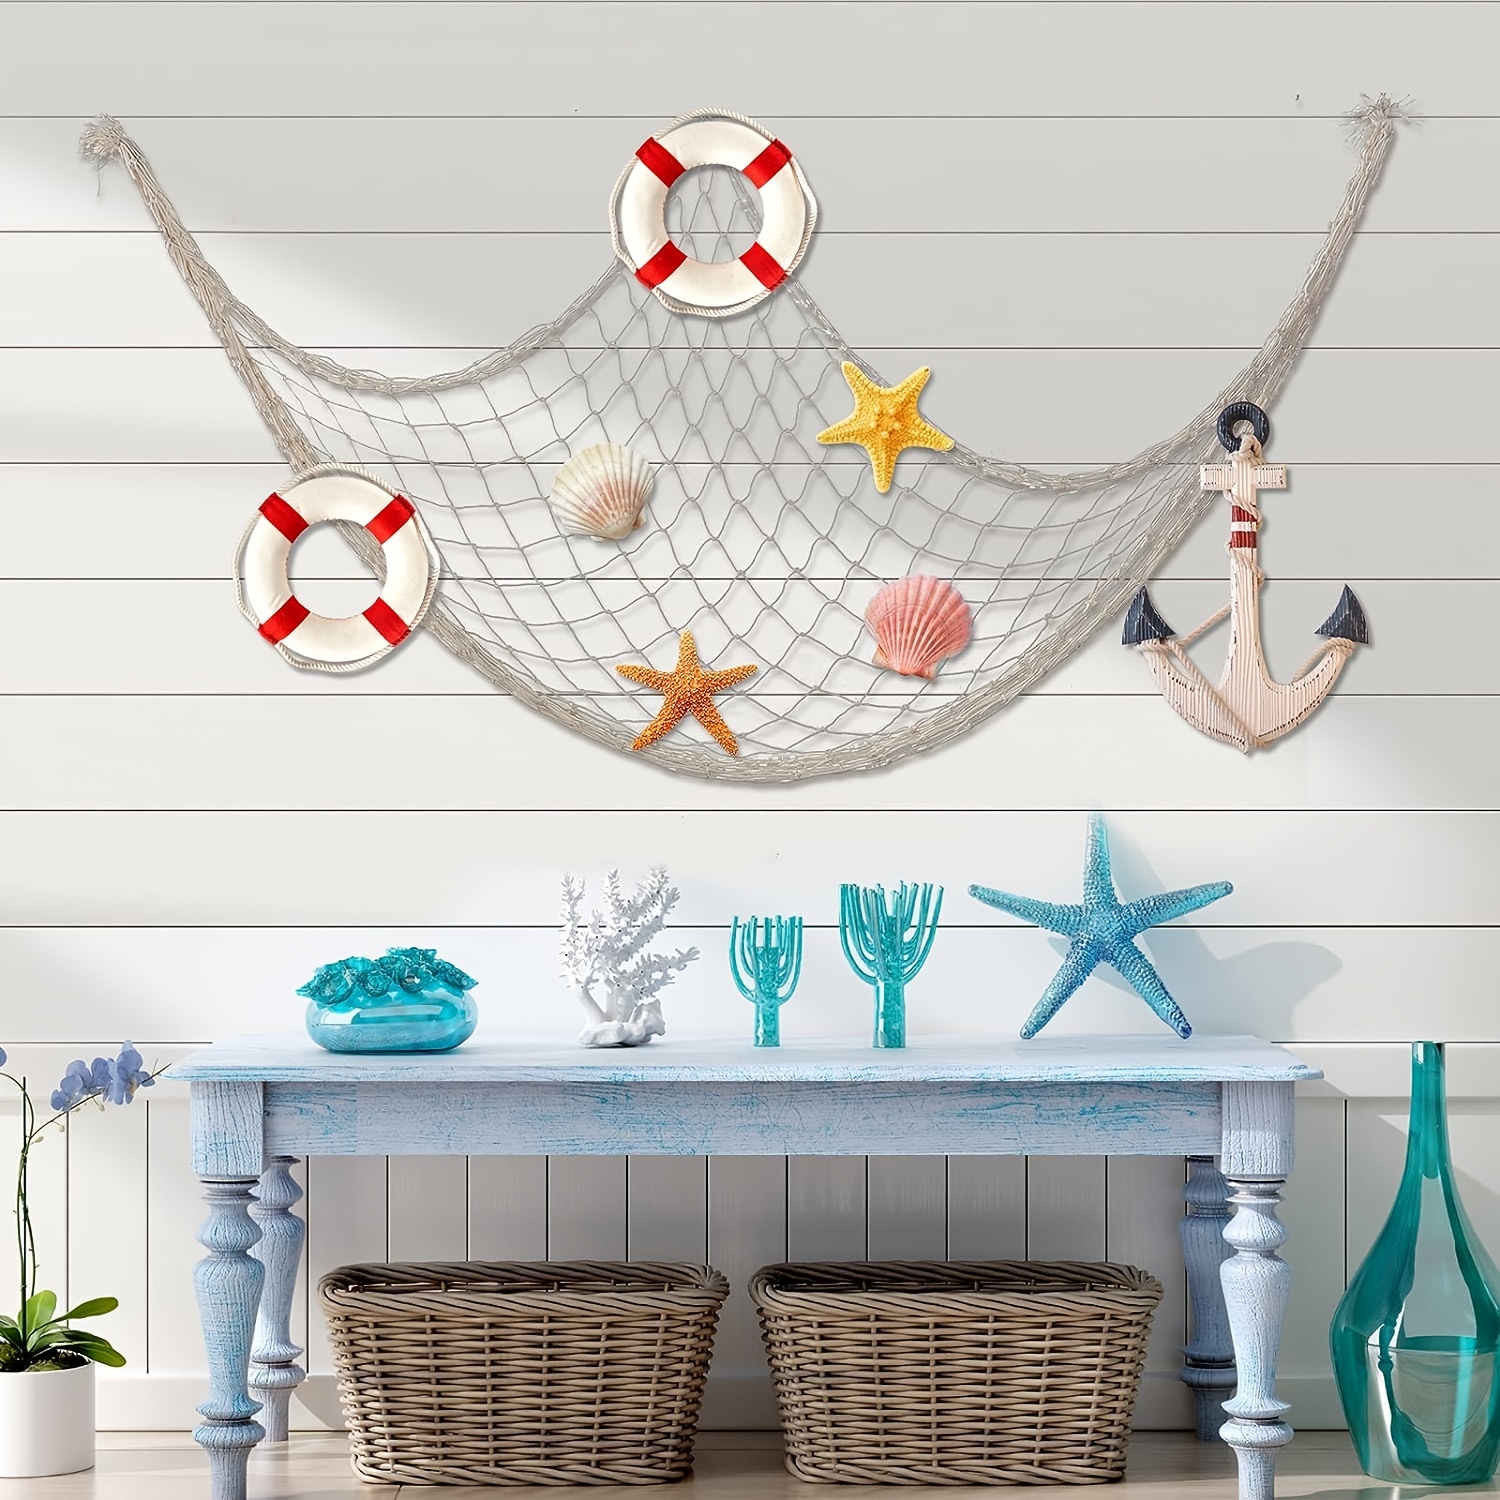  Natural Fish Net Party Decorations for Pirate Party